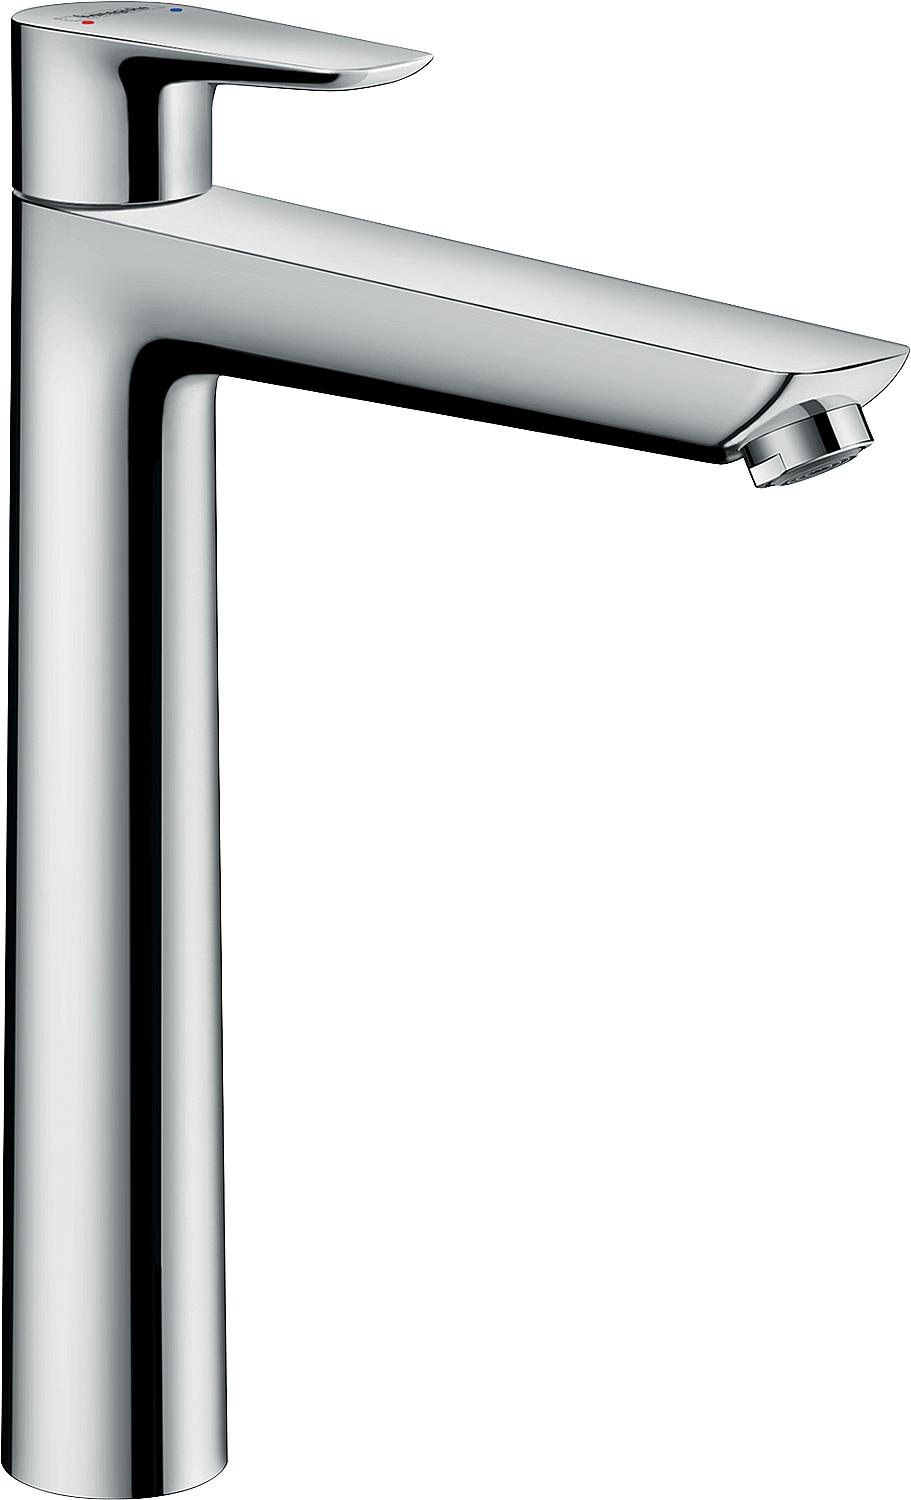 asdec life ® basin mixer Hansgrohe 240 Talis E, with chrome waste set, projection 183mm